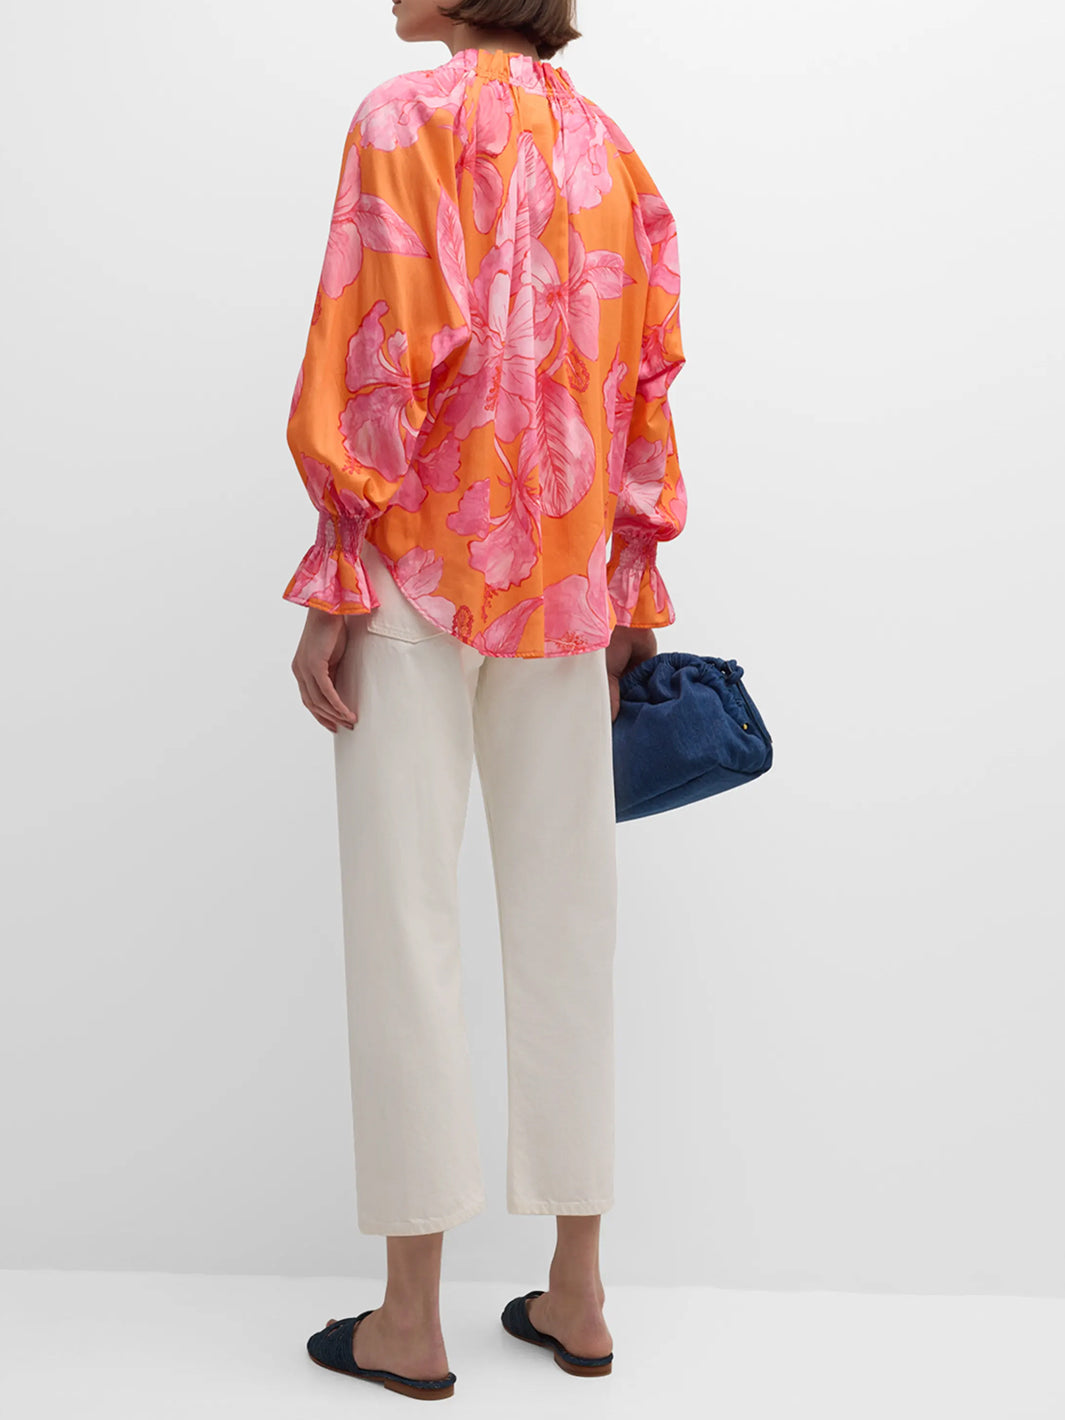 Candace Floral Blouse in Orange/Pink